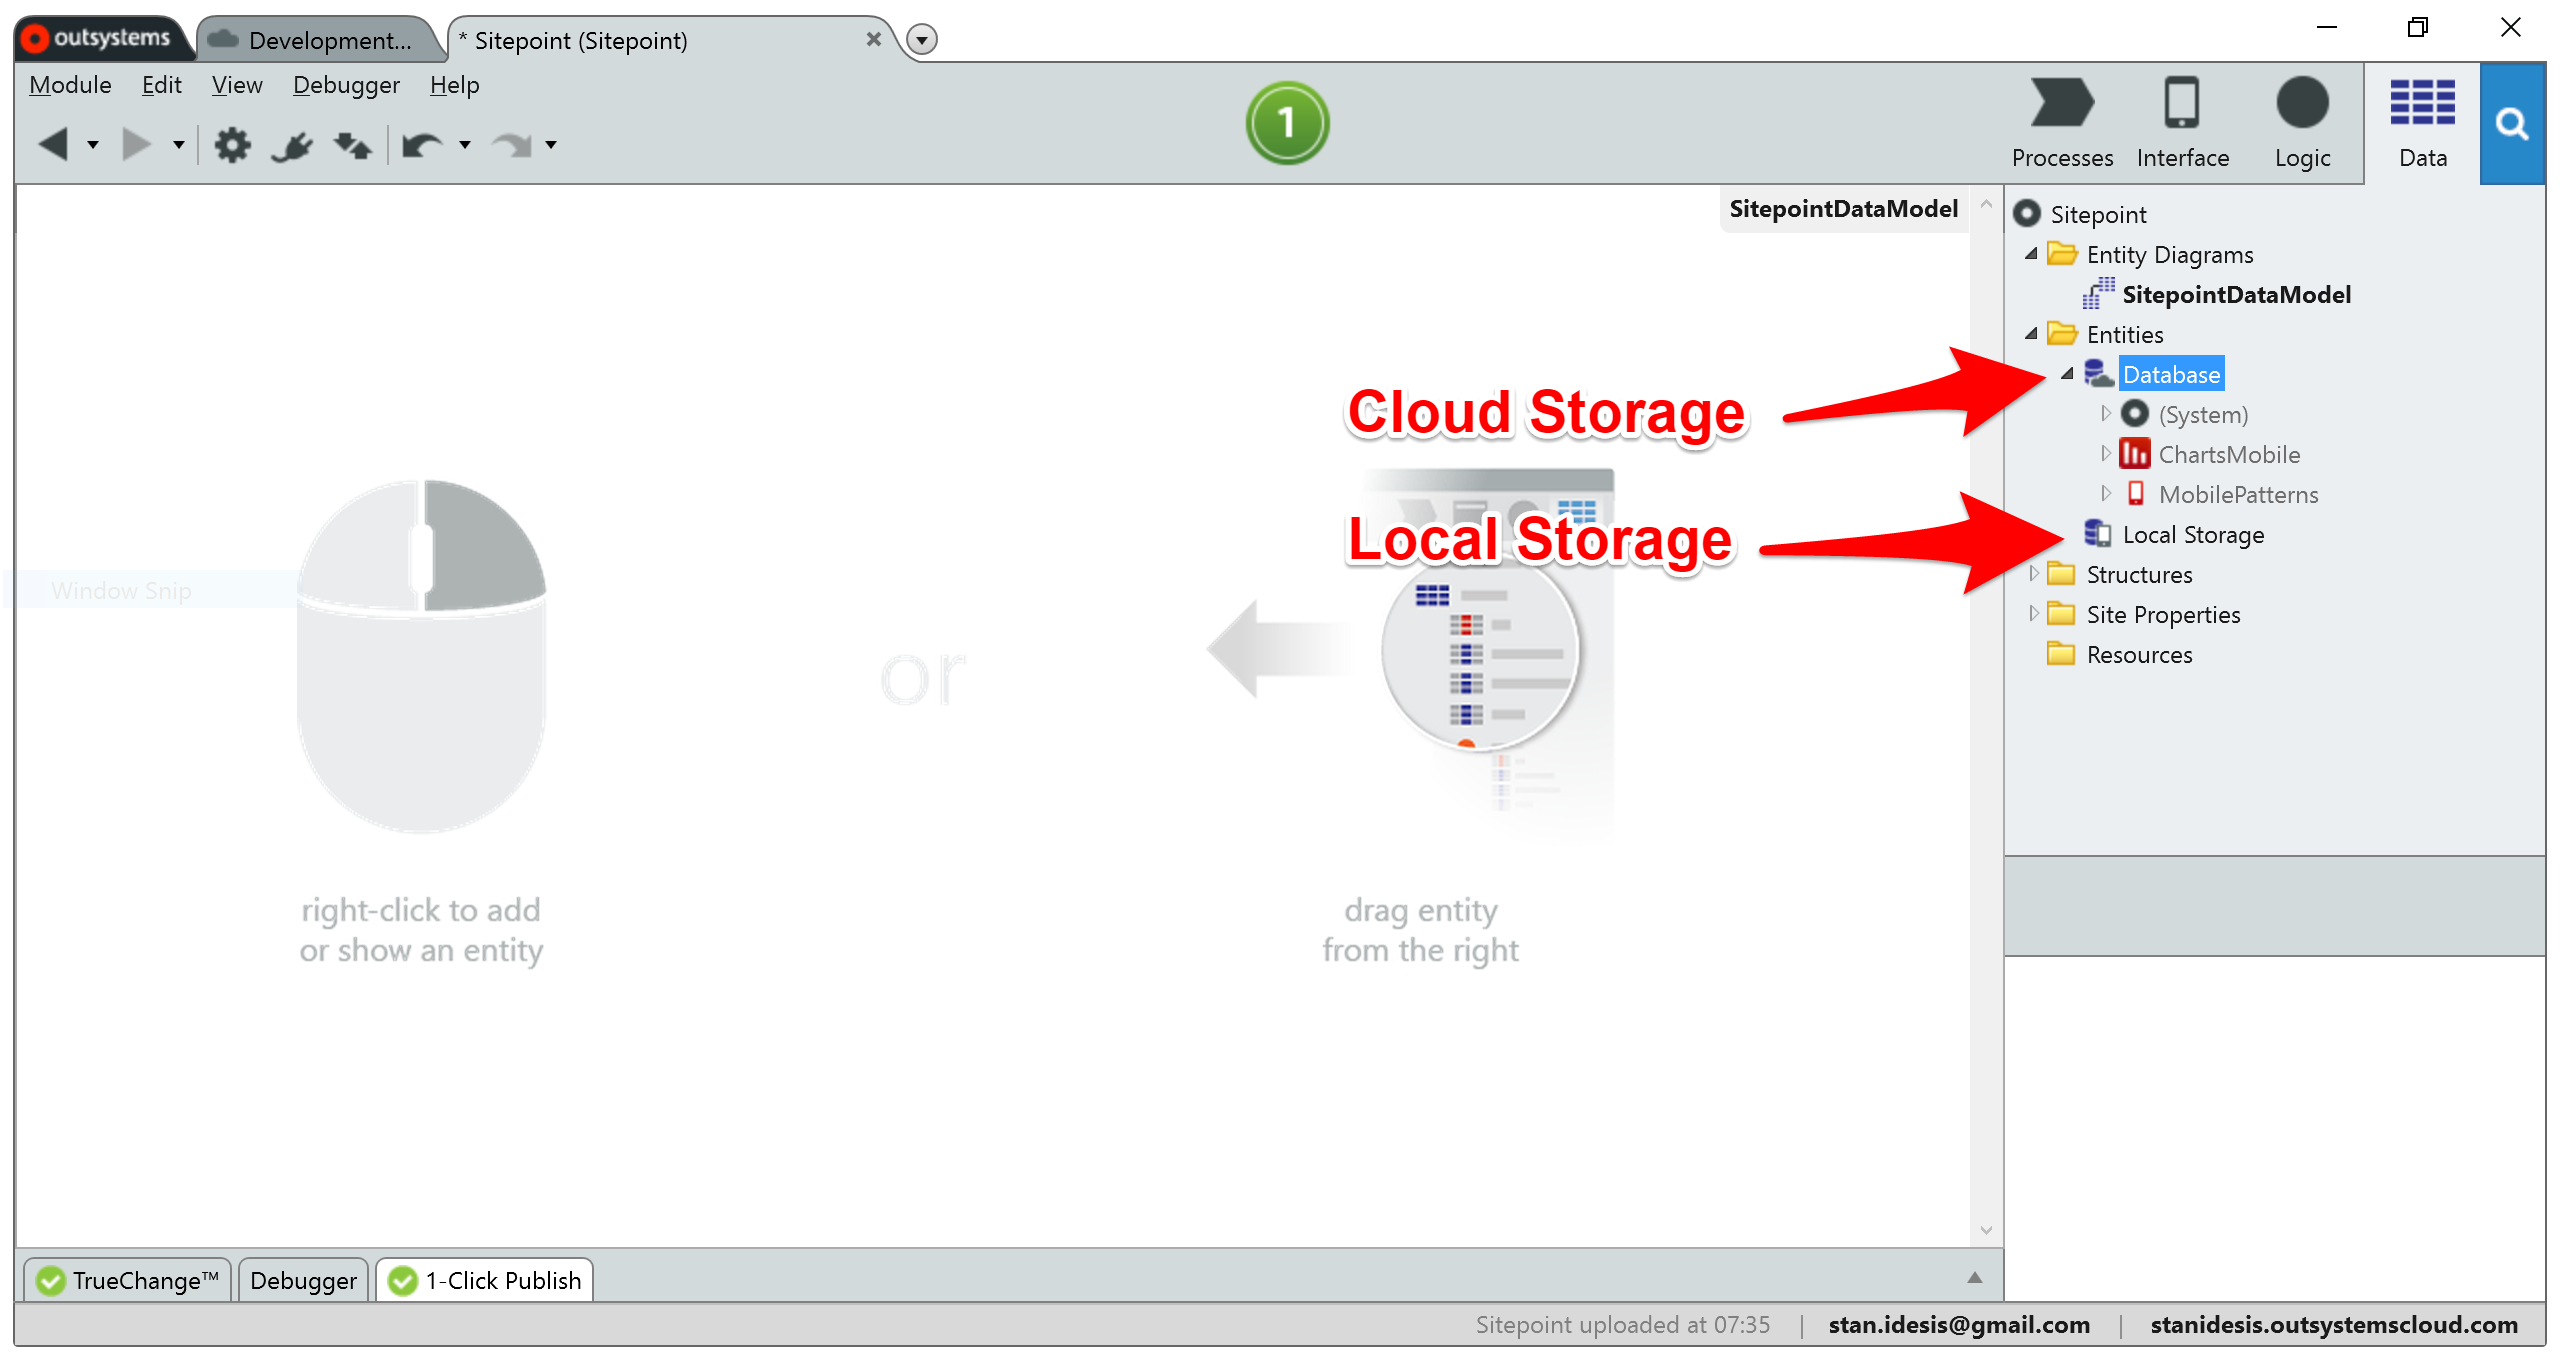 Cloud and Local Storage